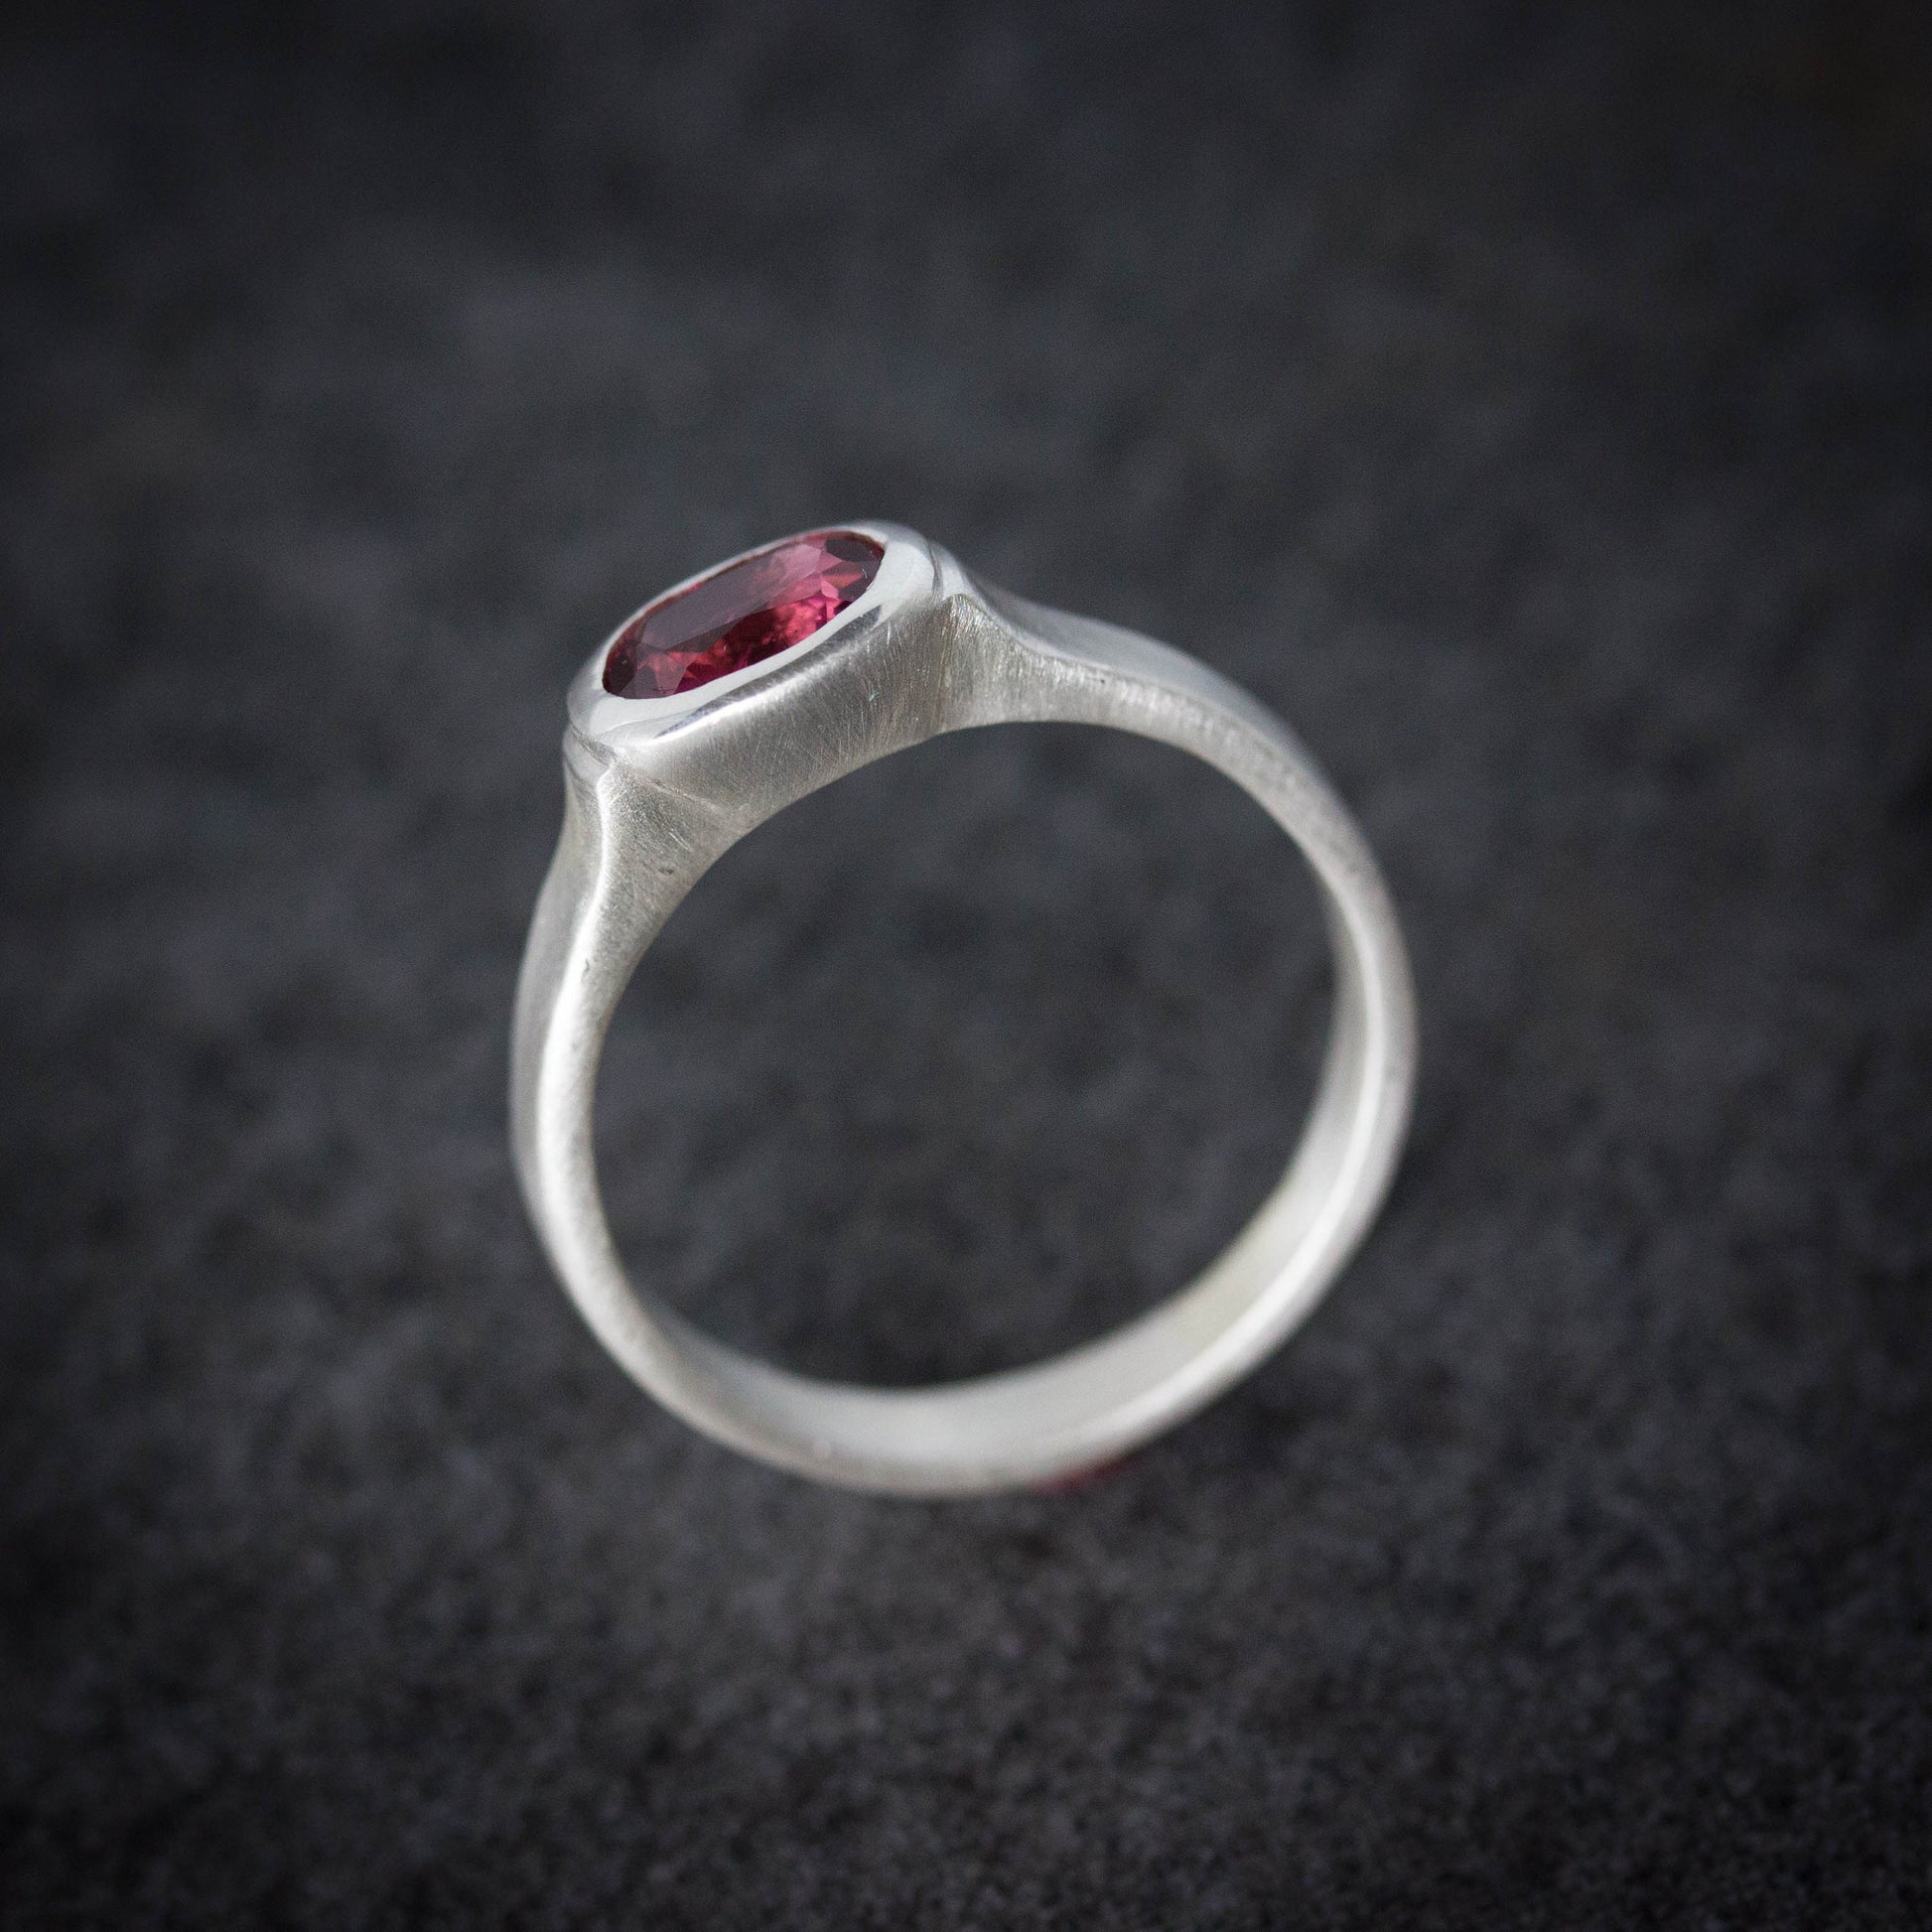 A Pink Tourmaline Wide Band Ring, Brushed Silver With Low Profile, Size 7 Oval Gemstone Solitaire and October Birthstone with handmade jewelry.